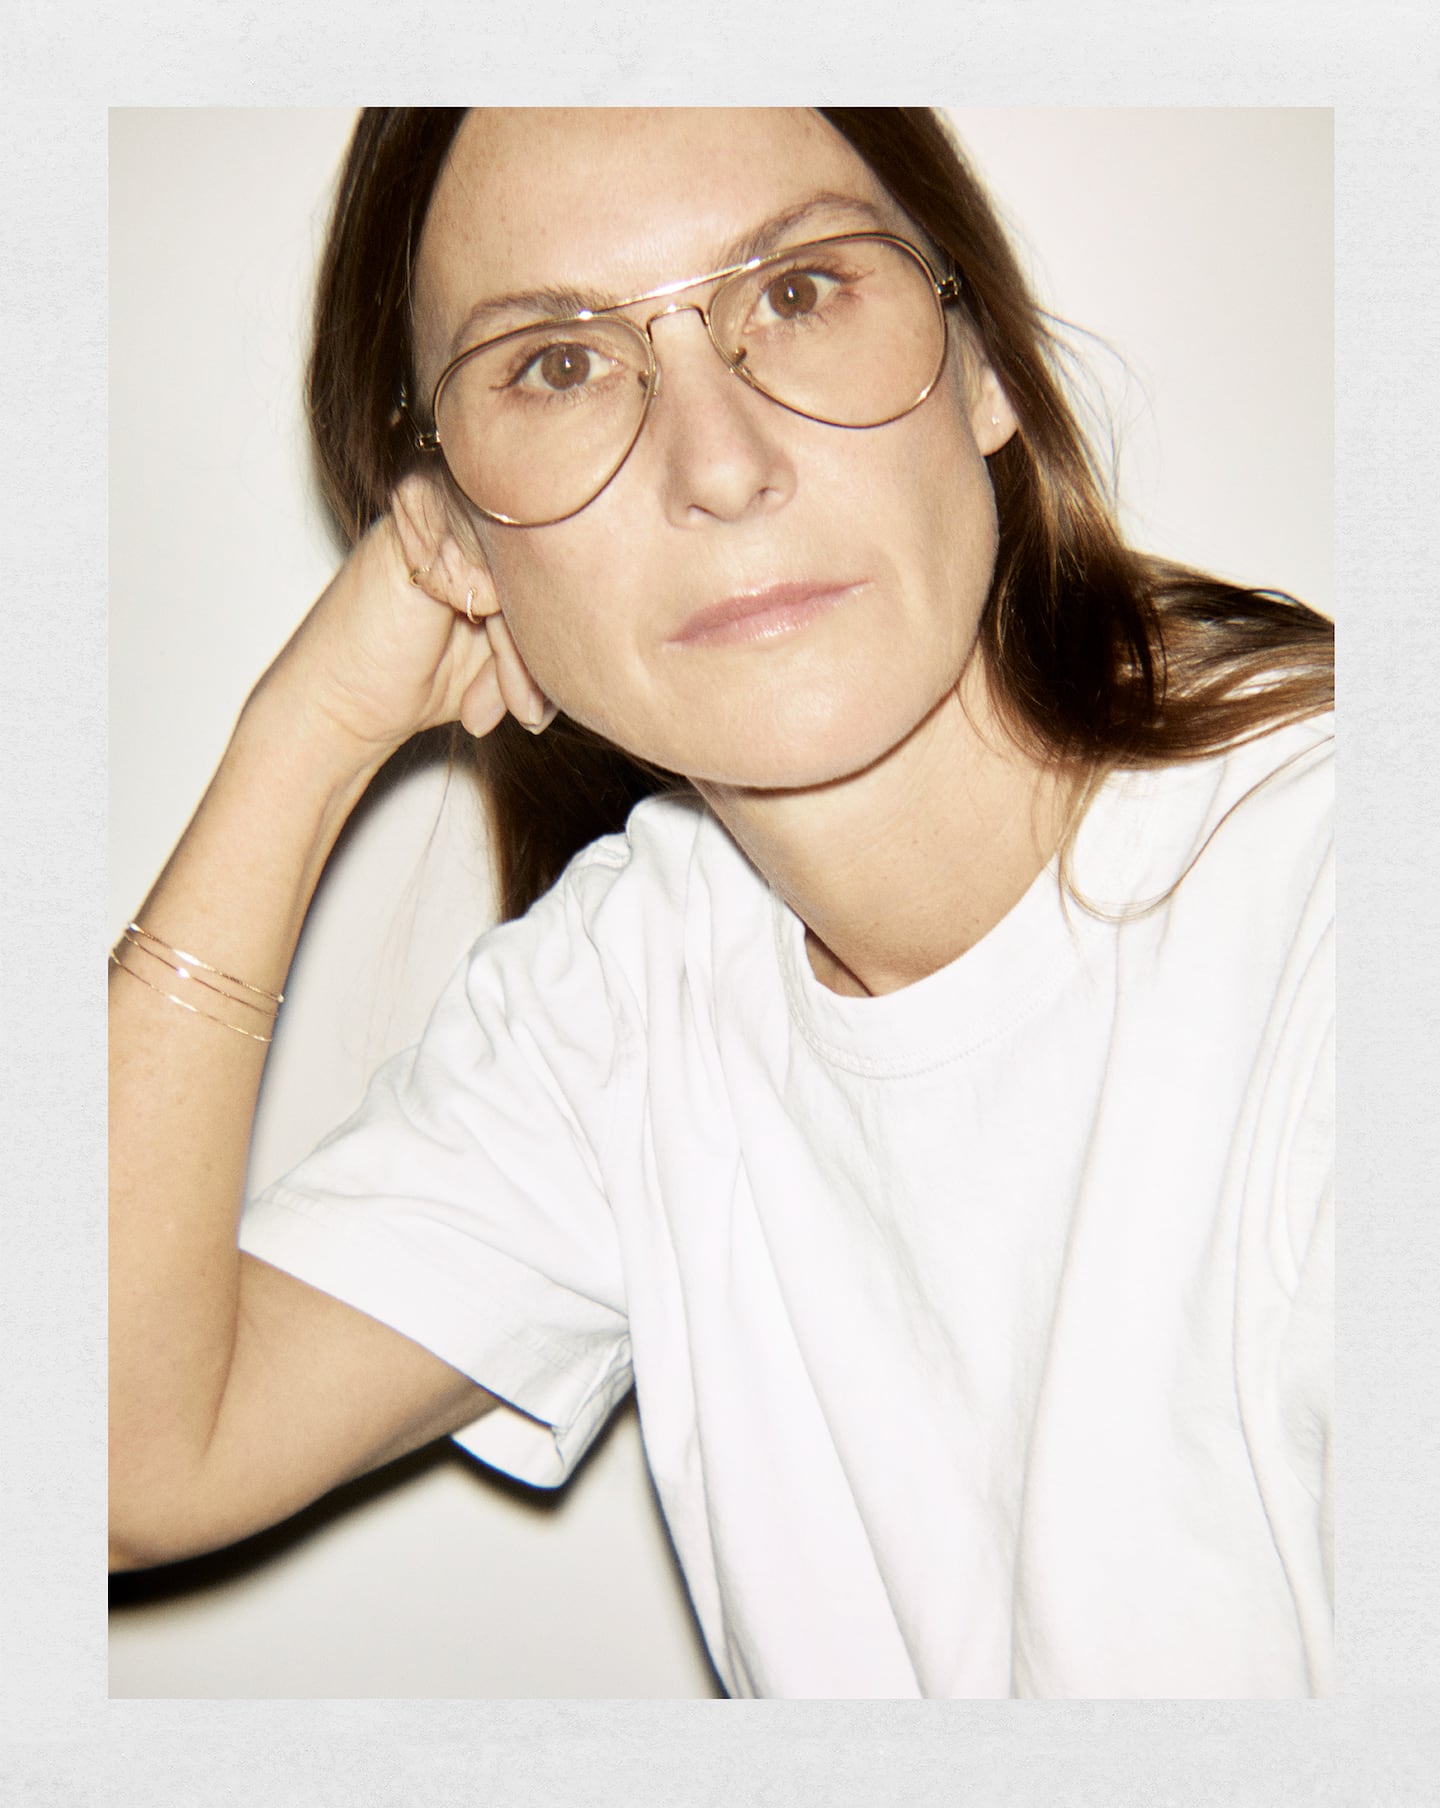 Louise Trotter will show her first collection for Carven in September.